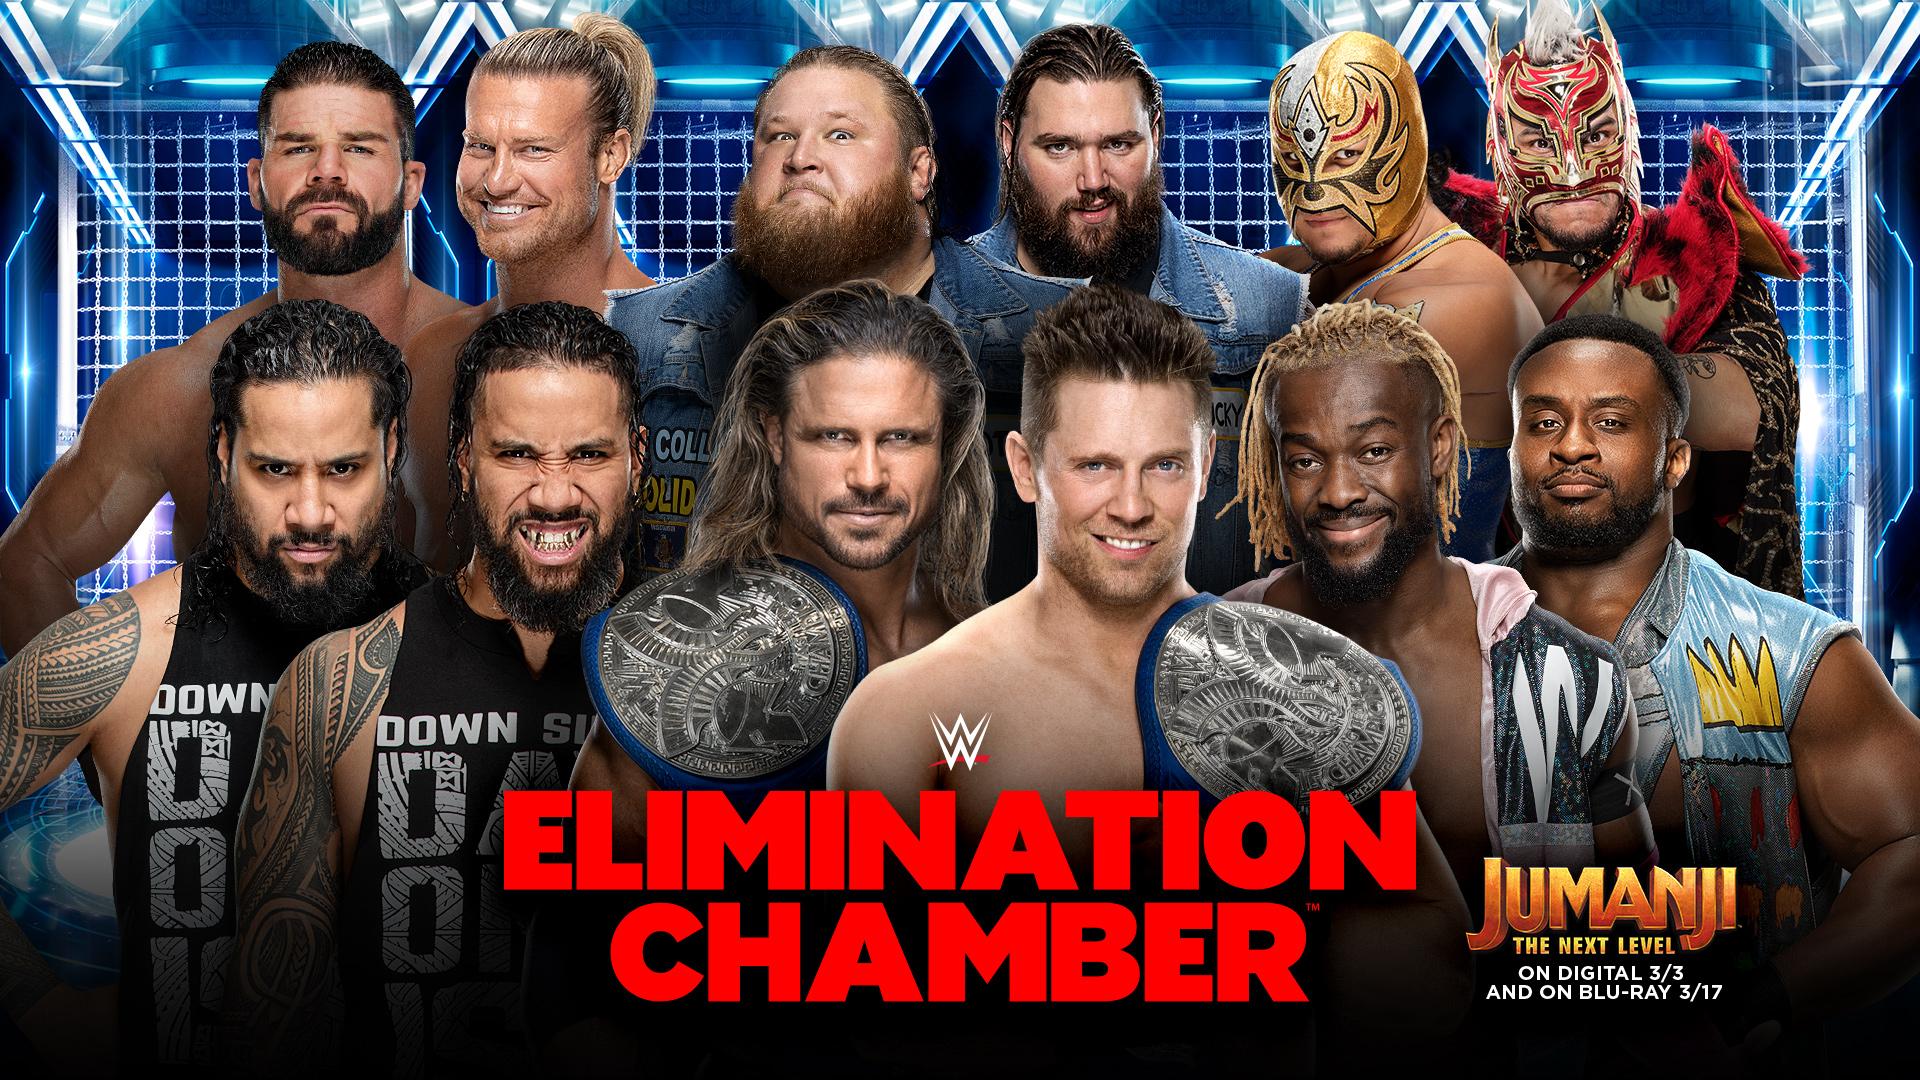 WWE Elimination Chamber 2020 Review and Match Ratings